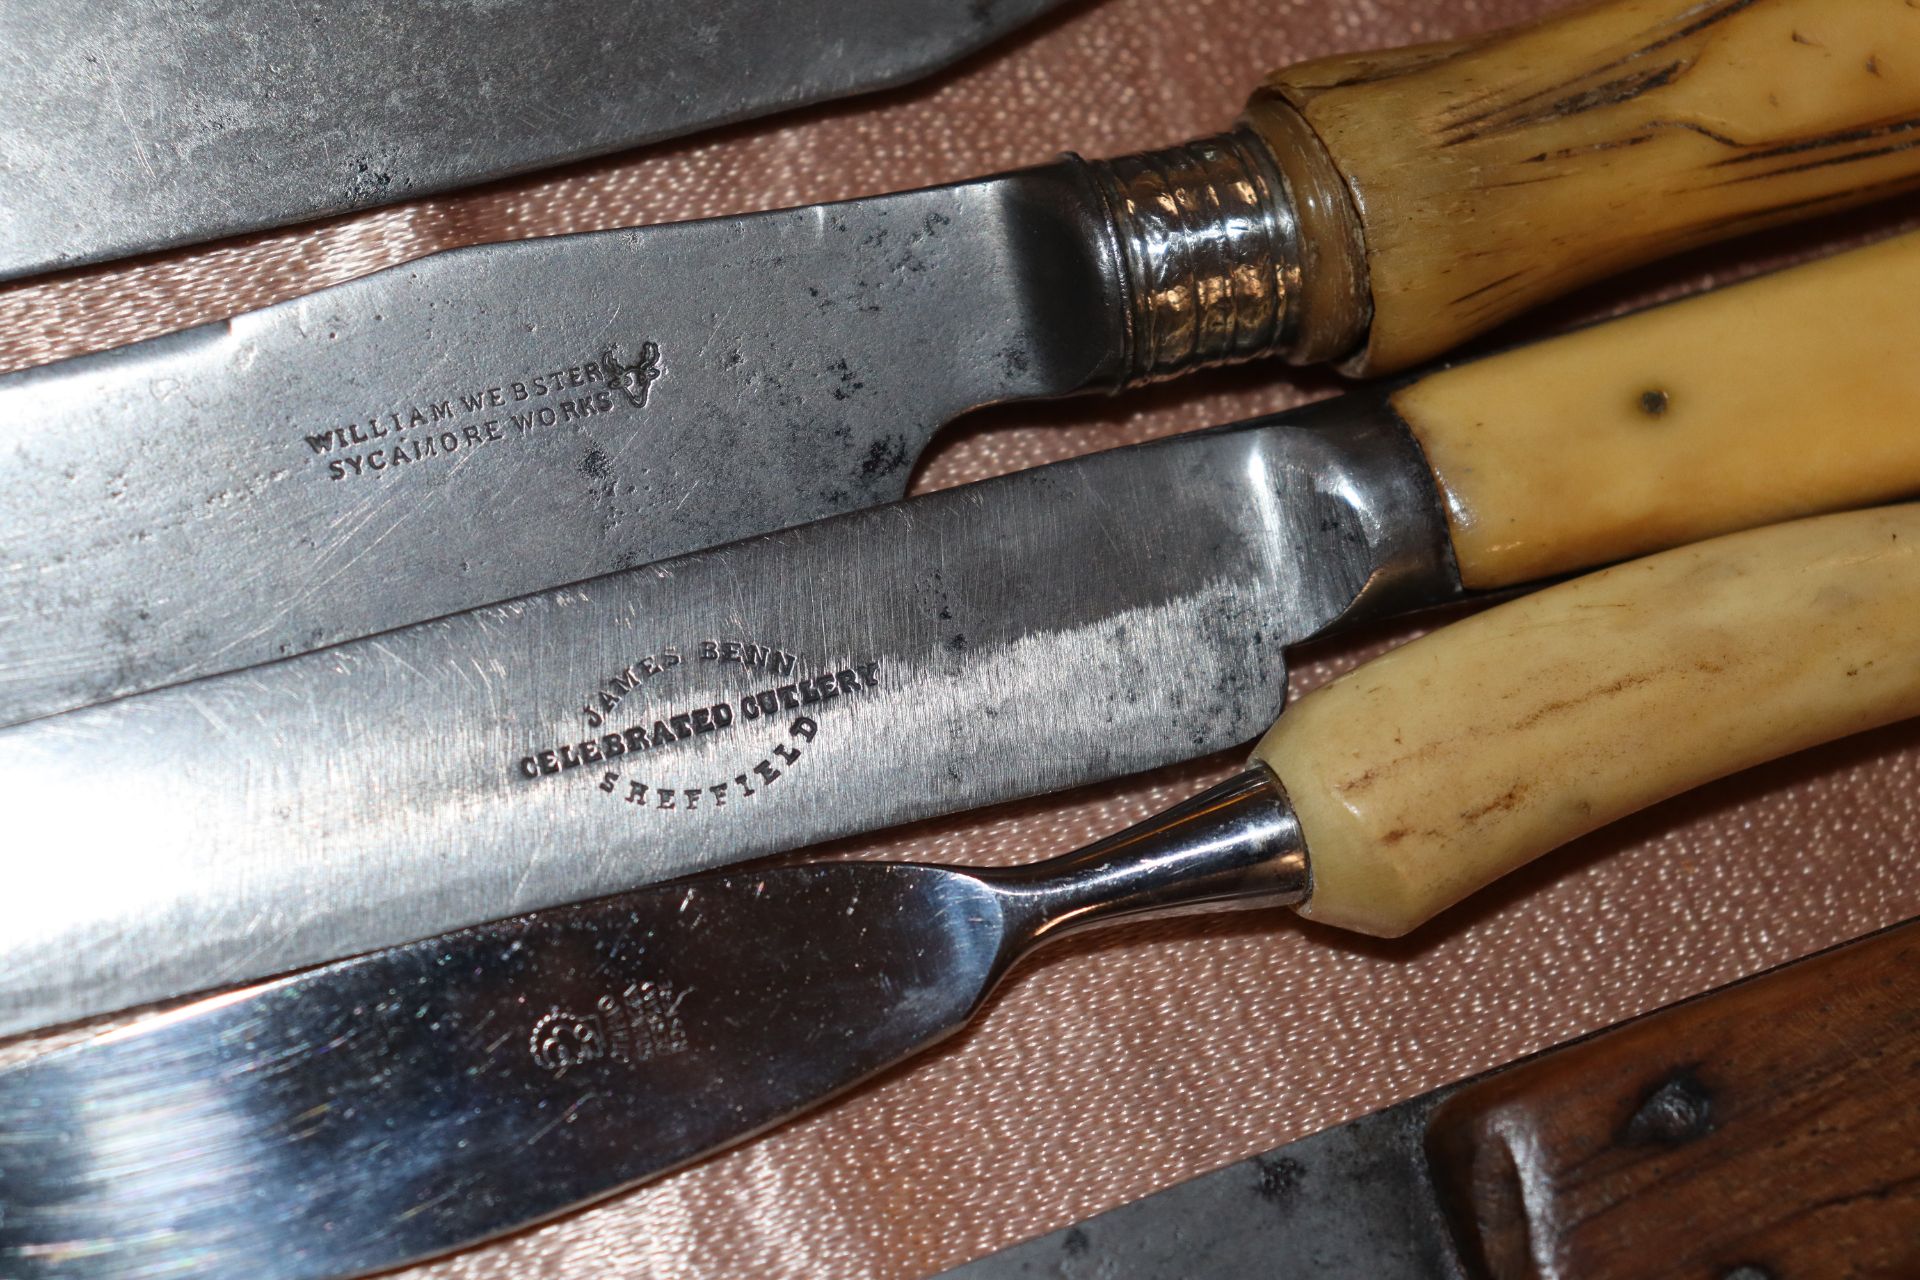 Six vintage kitchen and carving knives - Image 2 of 3